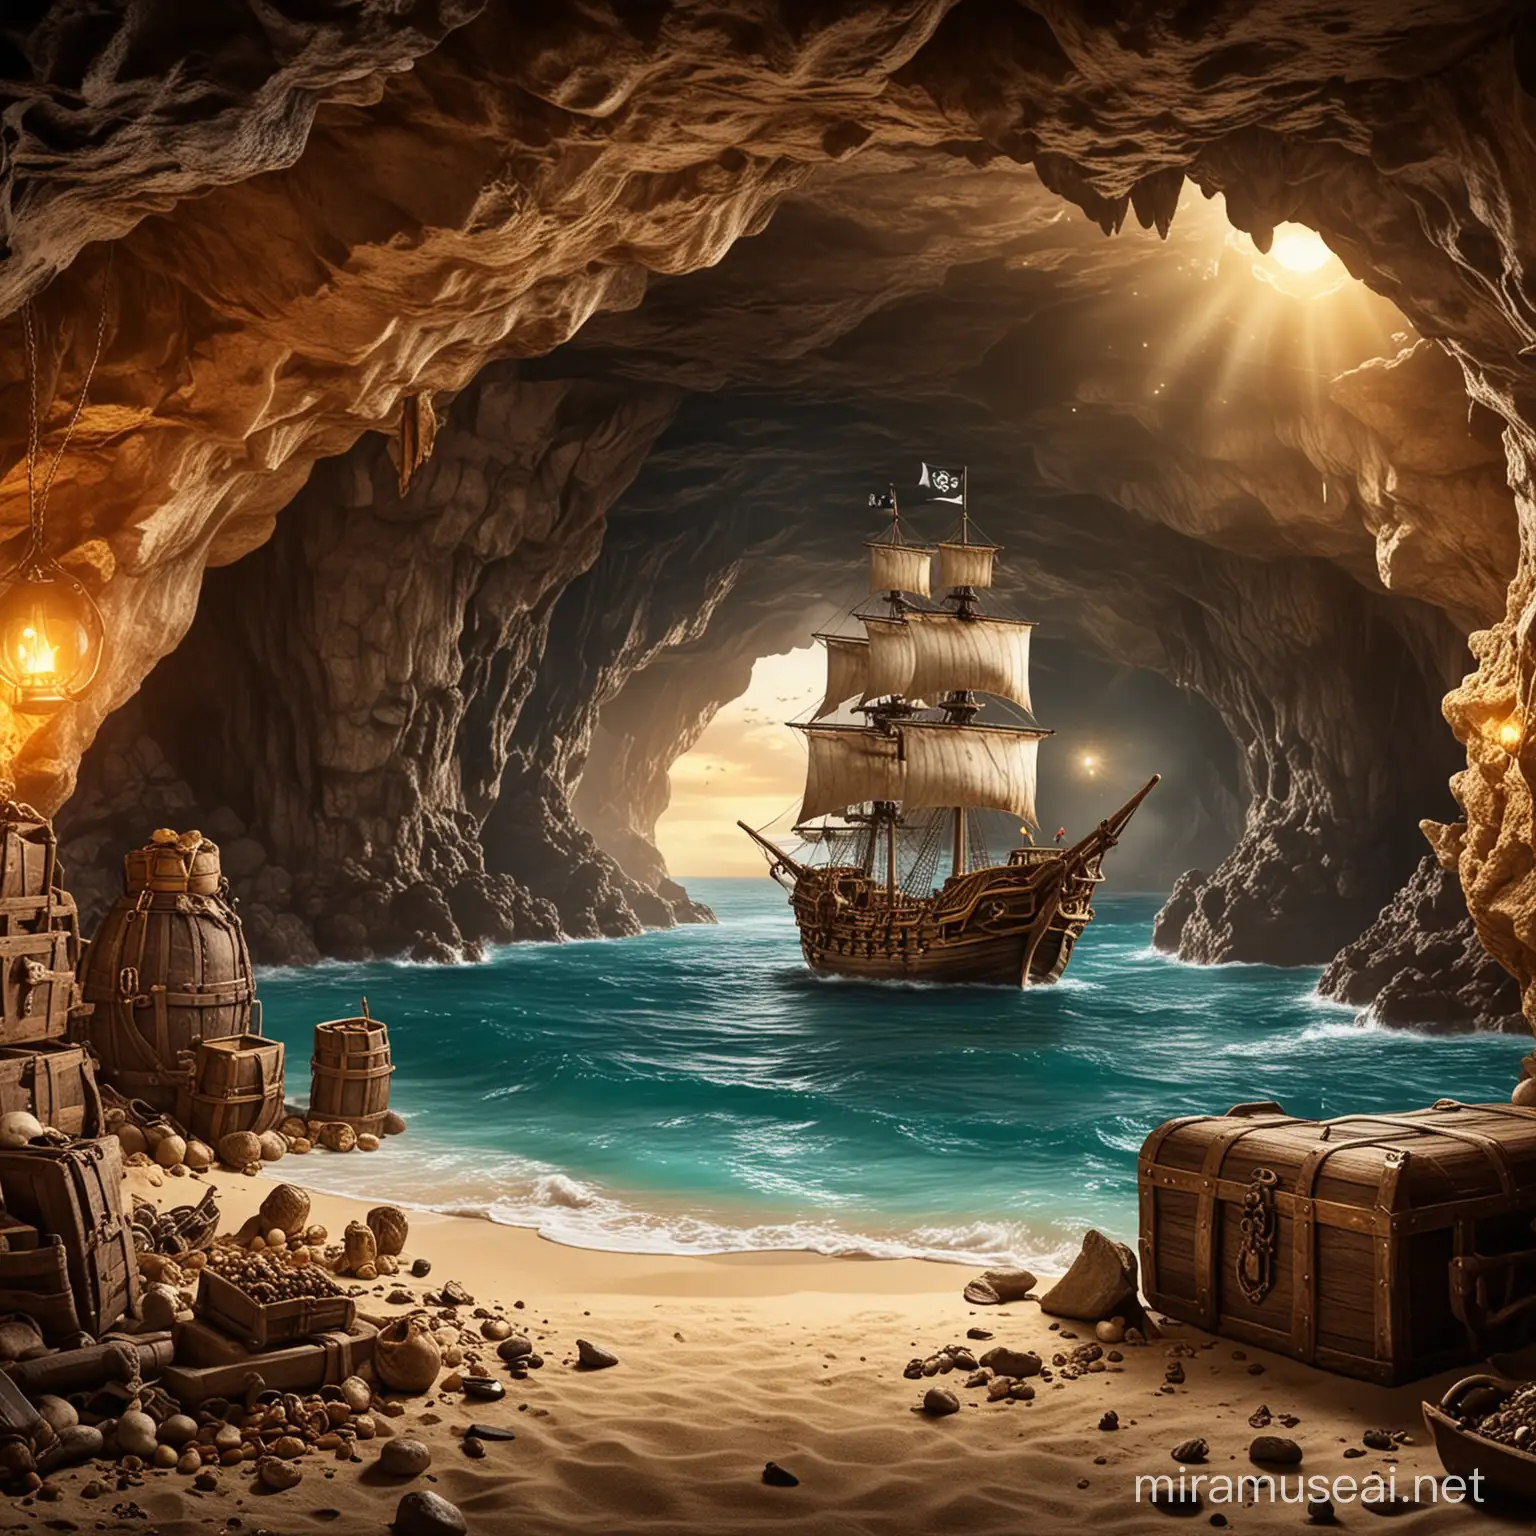 Exploring a Pirate Cave with Treasure and Ship in Background